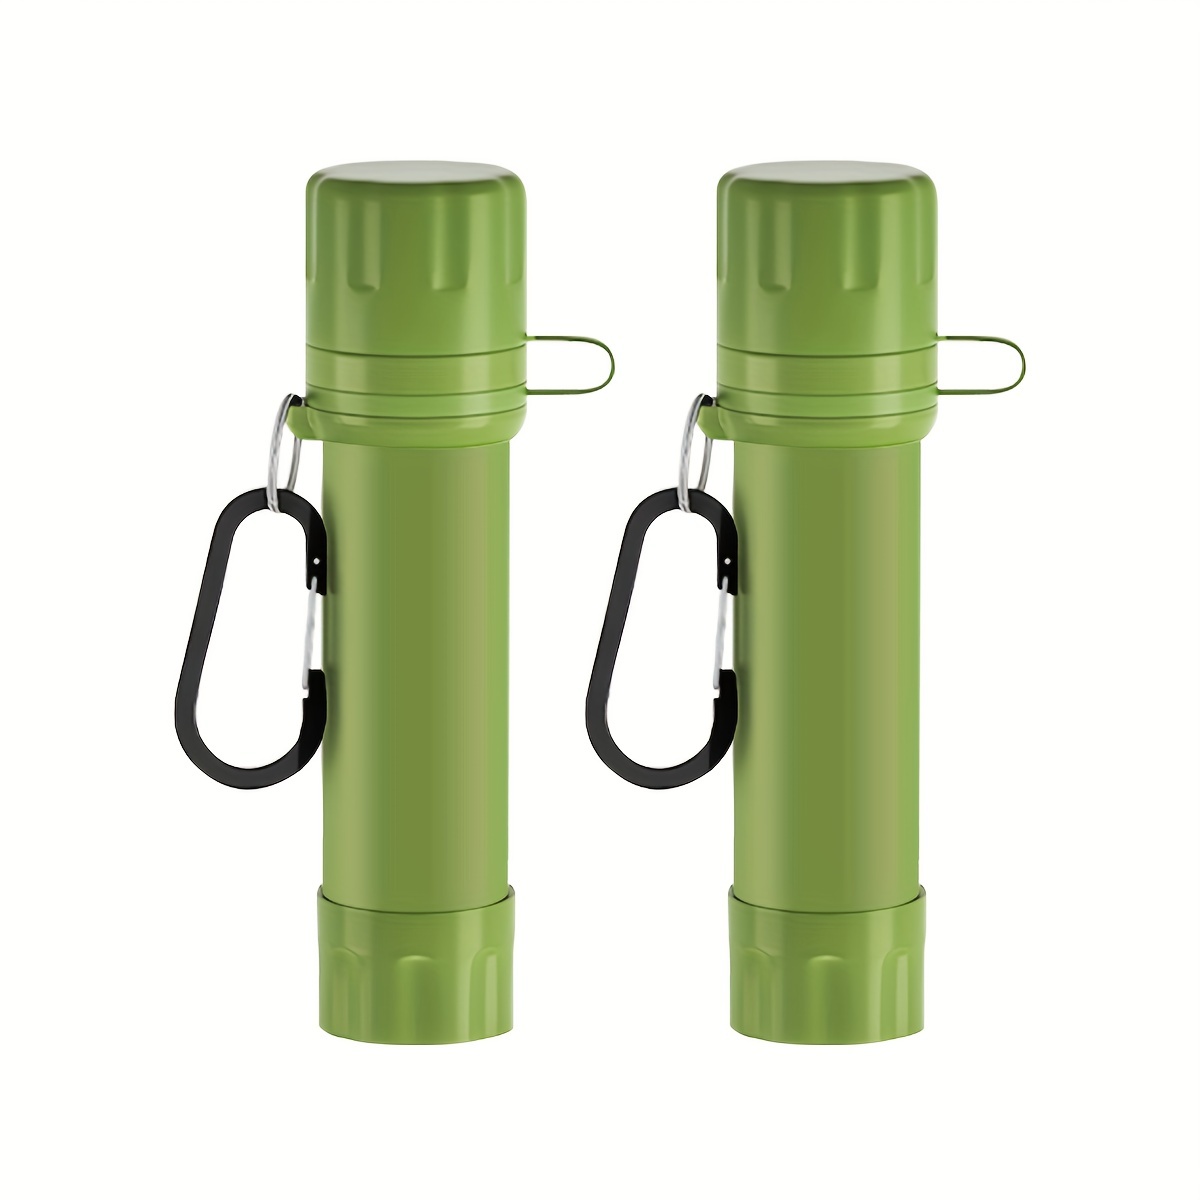 1pc 2pcs Mini Portable Water Filter Small Water Purifier Emergency  Situations Outdoor Survival Camping Fishing Picnic, Quick & Secure Online  Checkout